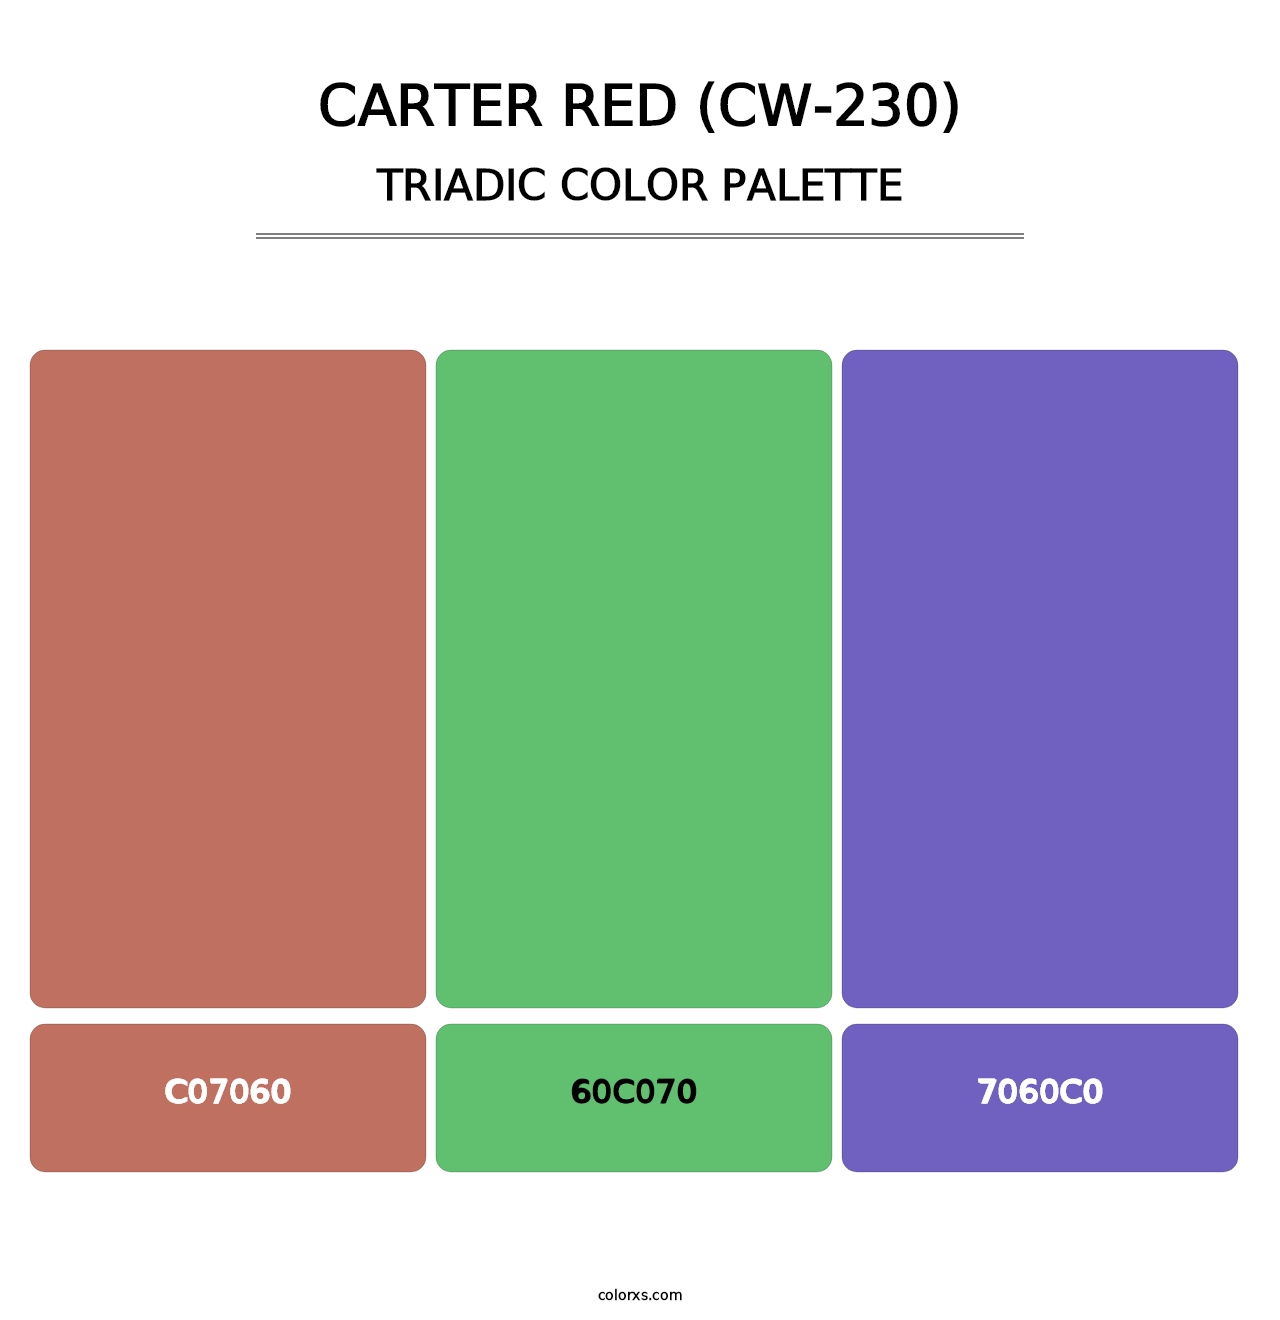 Carter Red (CW-230) - Triadic Color Palette